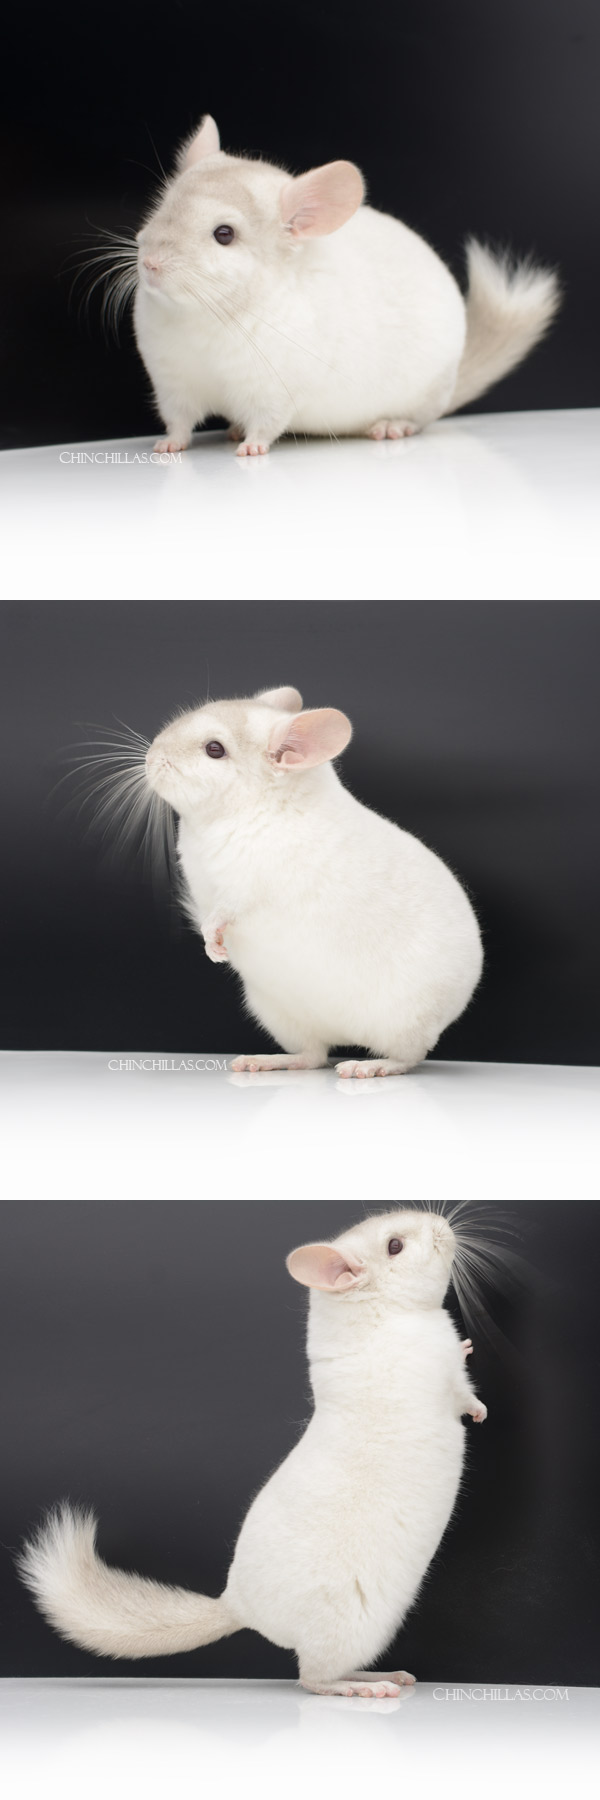 Chinchilla or related item offered for sale or export on Chinchillas.com - 22152 Intermediate Show Quality Pink White Male Chinchilla